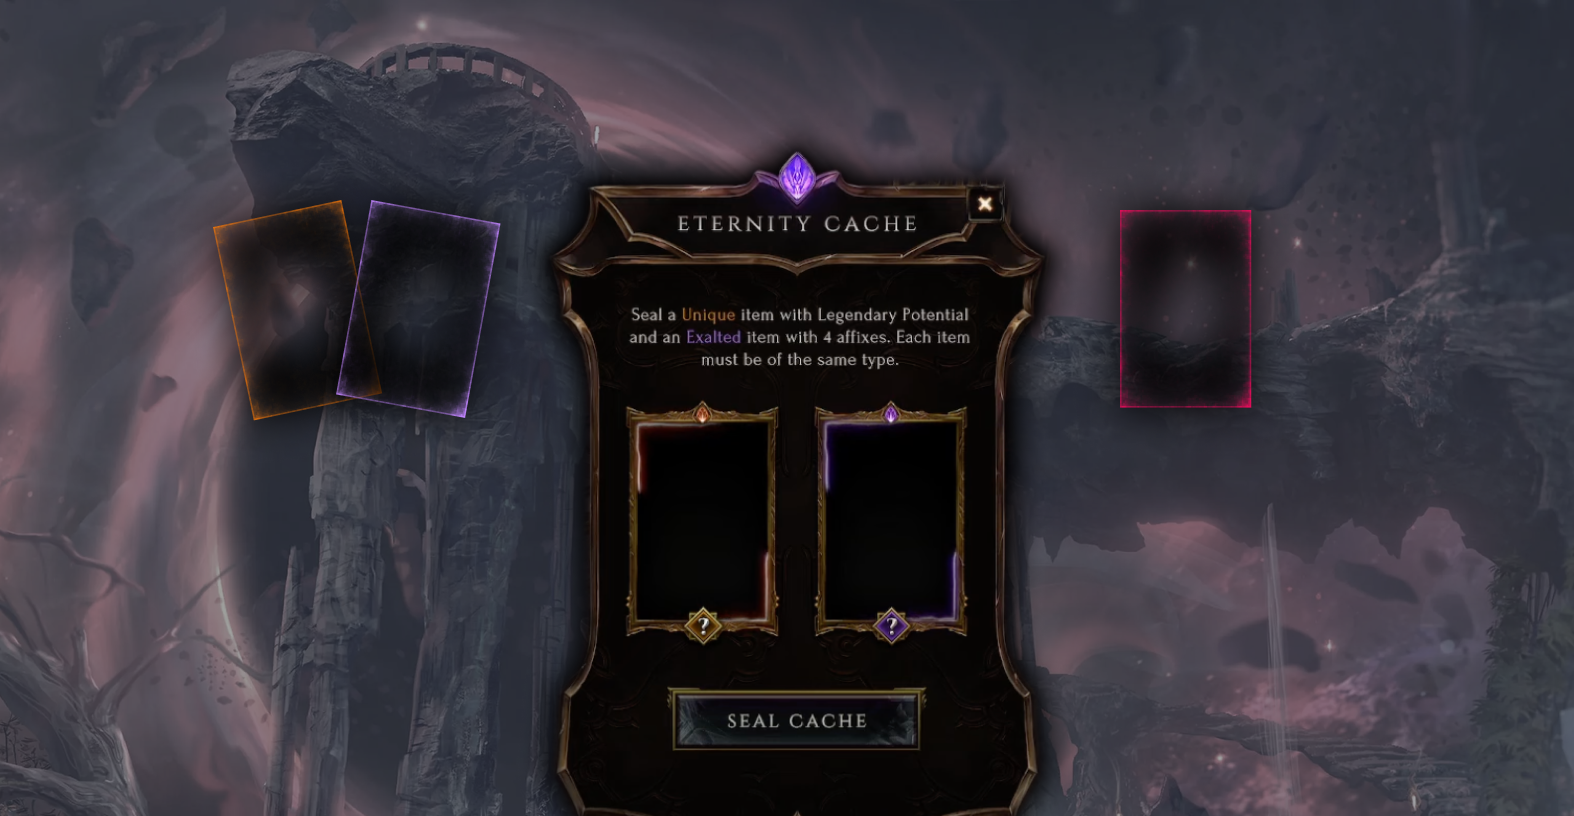 How Does the Eternity Cache Work